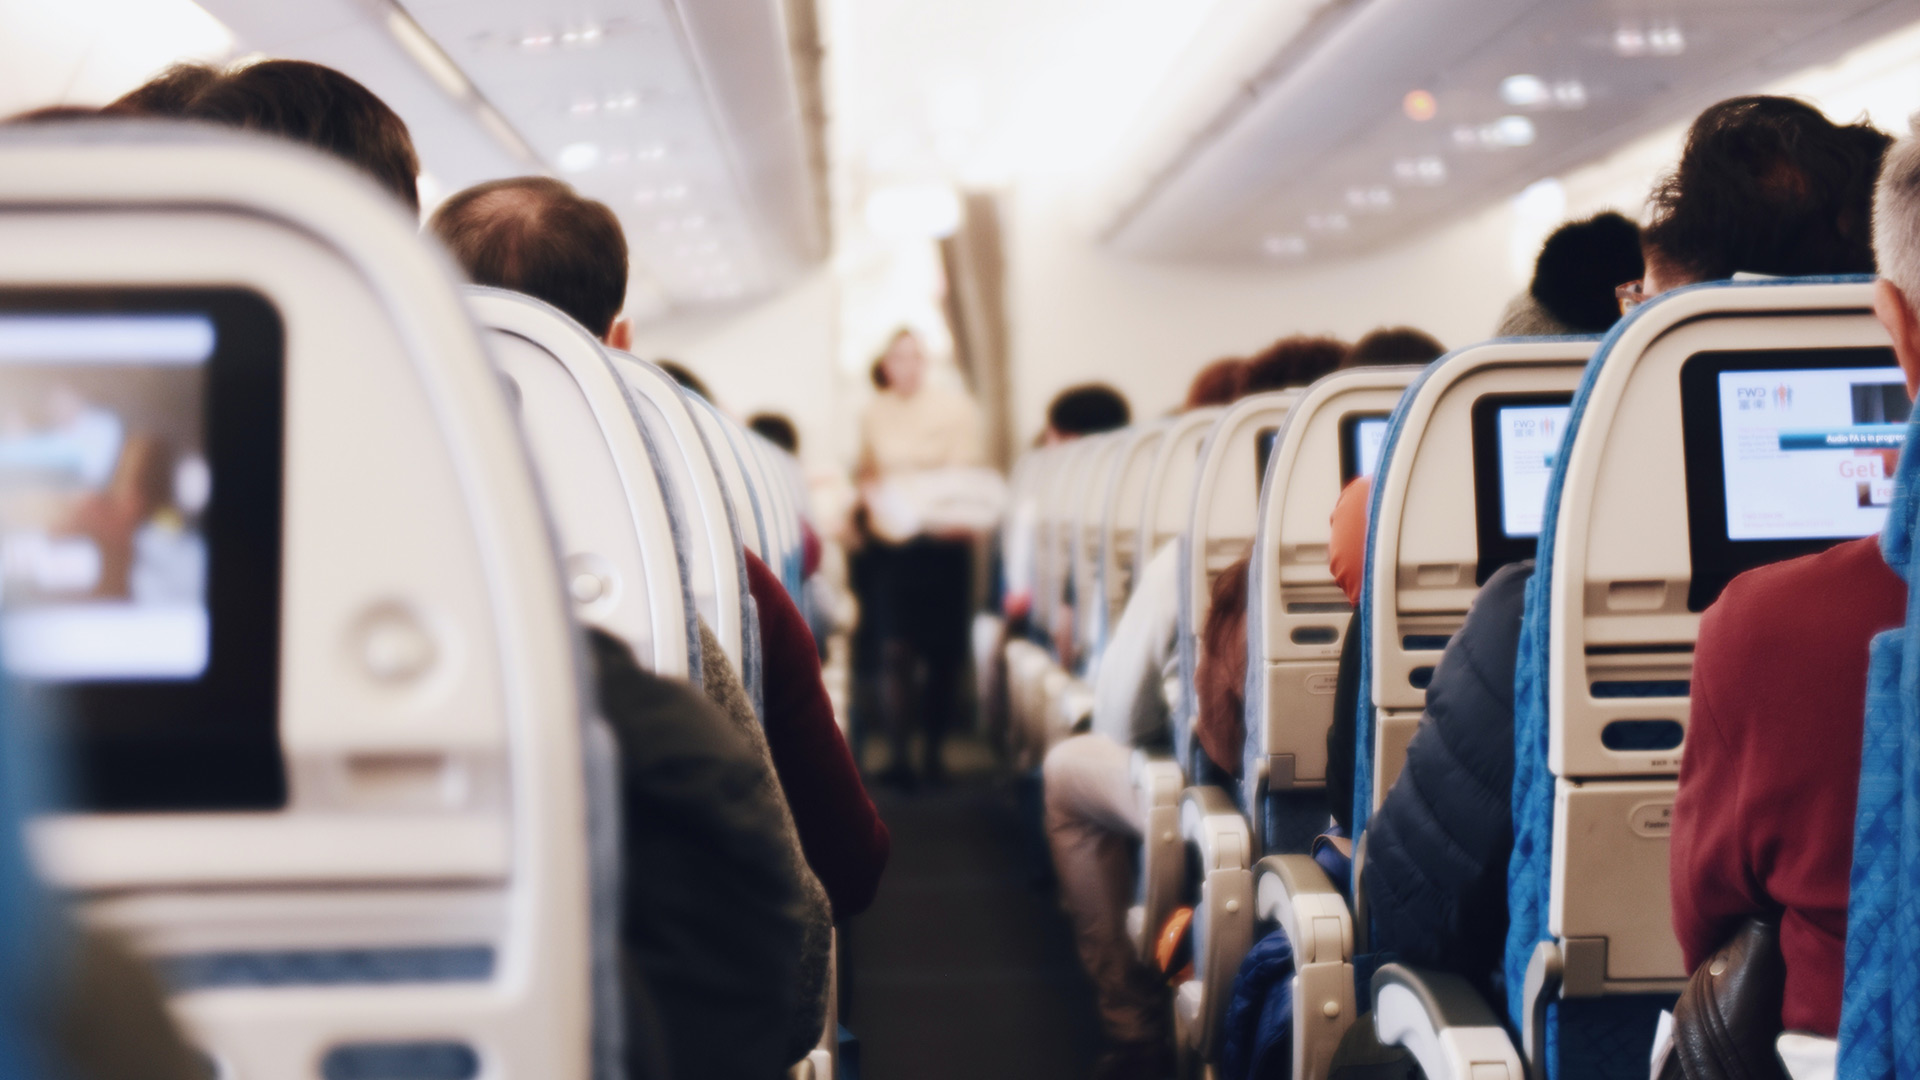 People sitting in airplane seats (Suhyeon Choi - Unsplash.com)